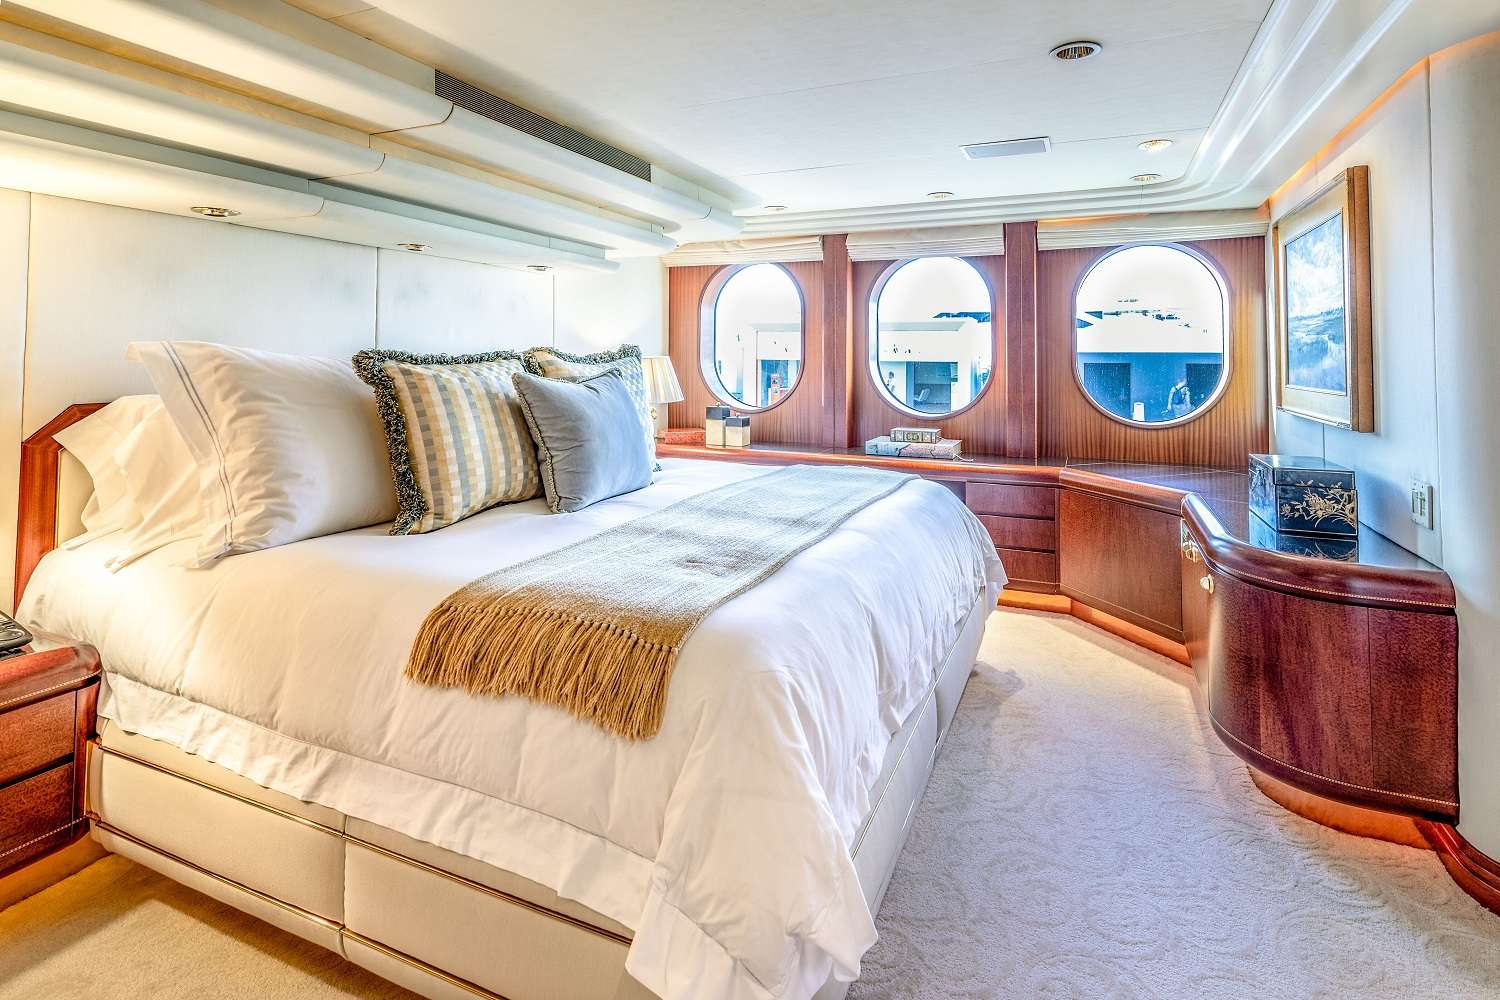 Motor Yacht 'NEVER ENOUGH' Master state room, 10 PAX, 7 Crew, 140.00 Ft, 42.00 Meters, Built 1992, Feadship, Refit Year 2019